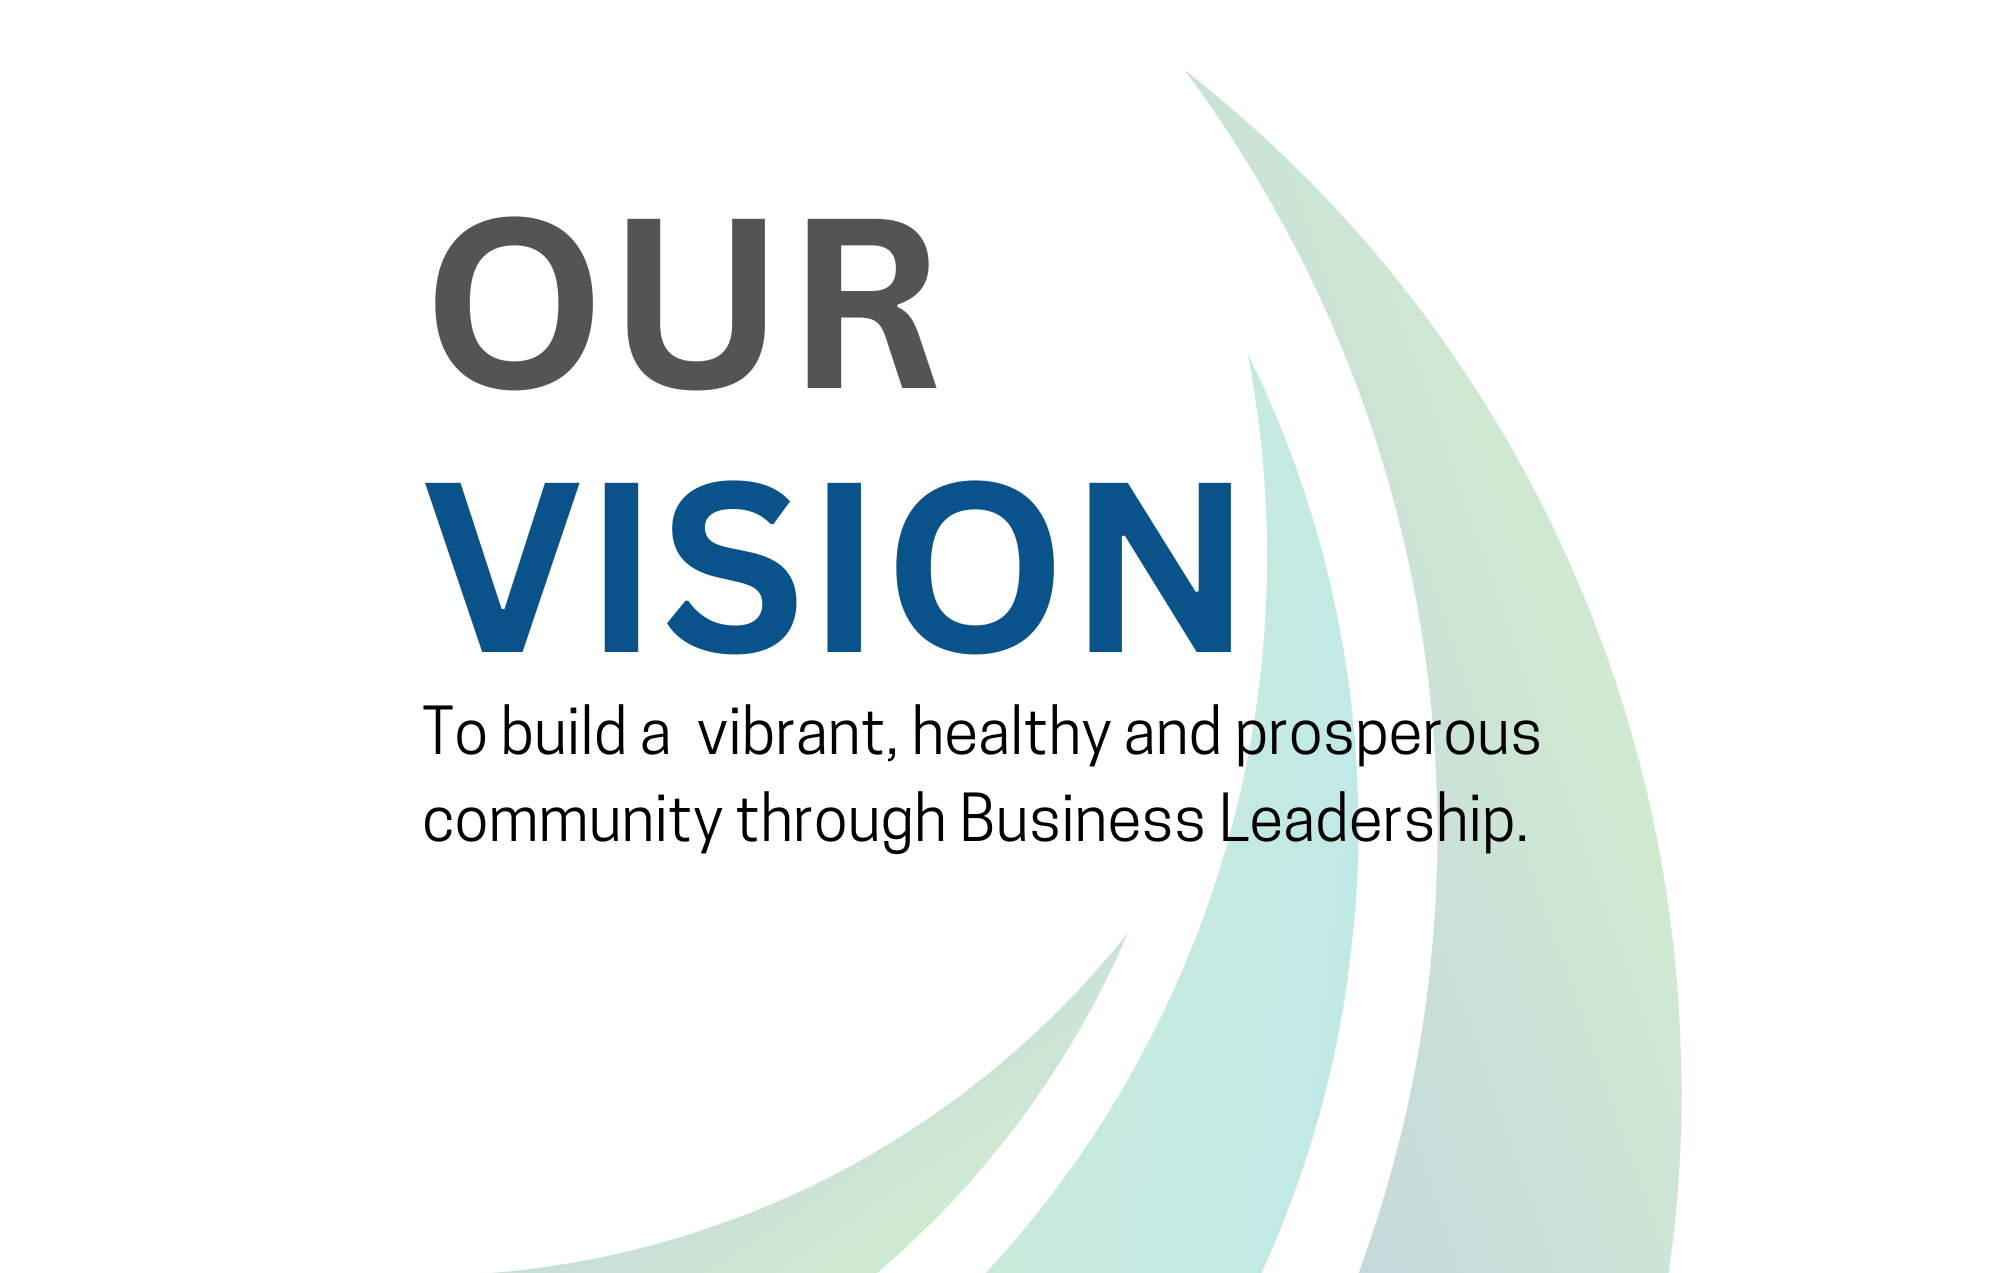 OUR VISION (1)